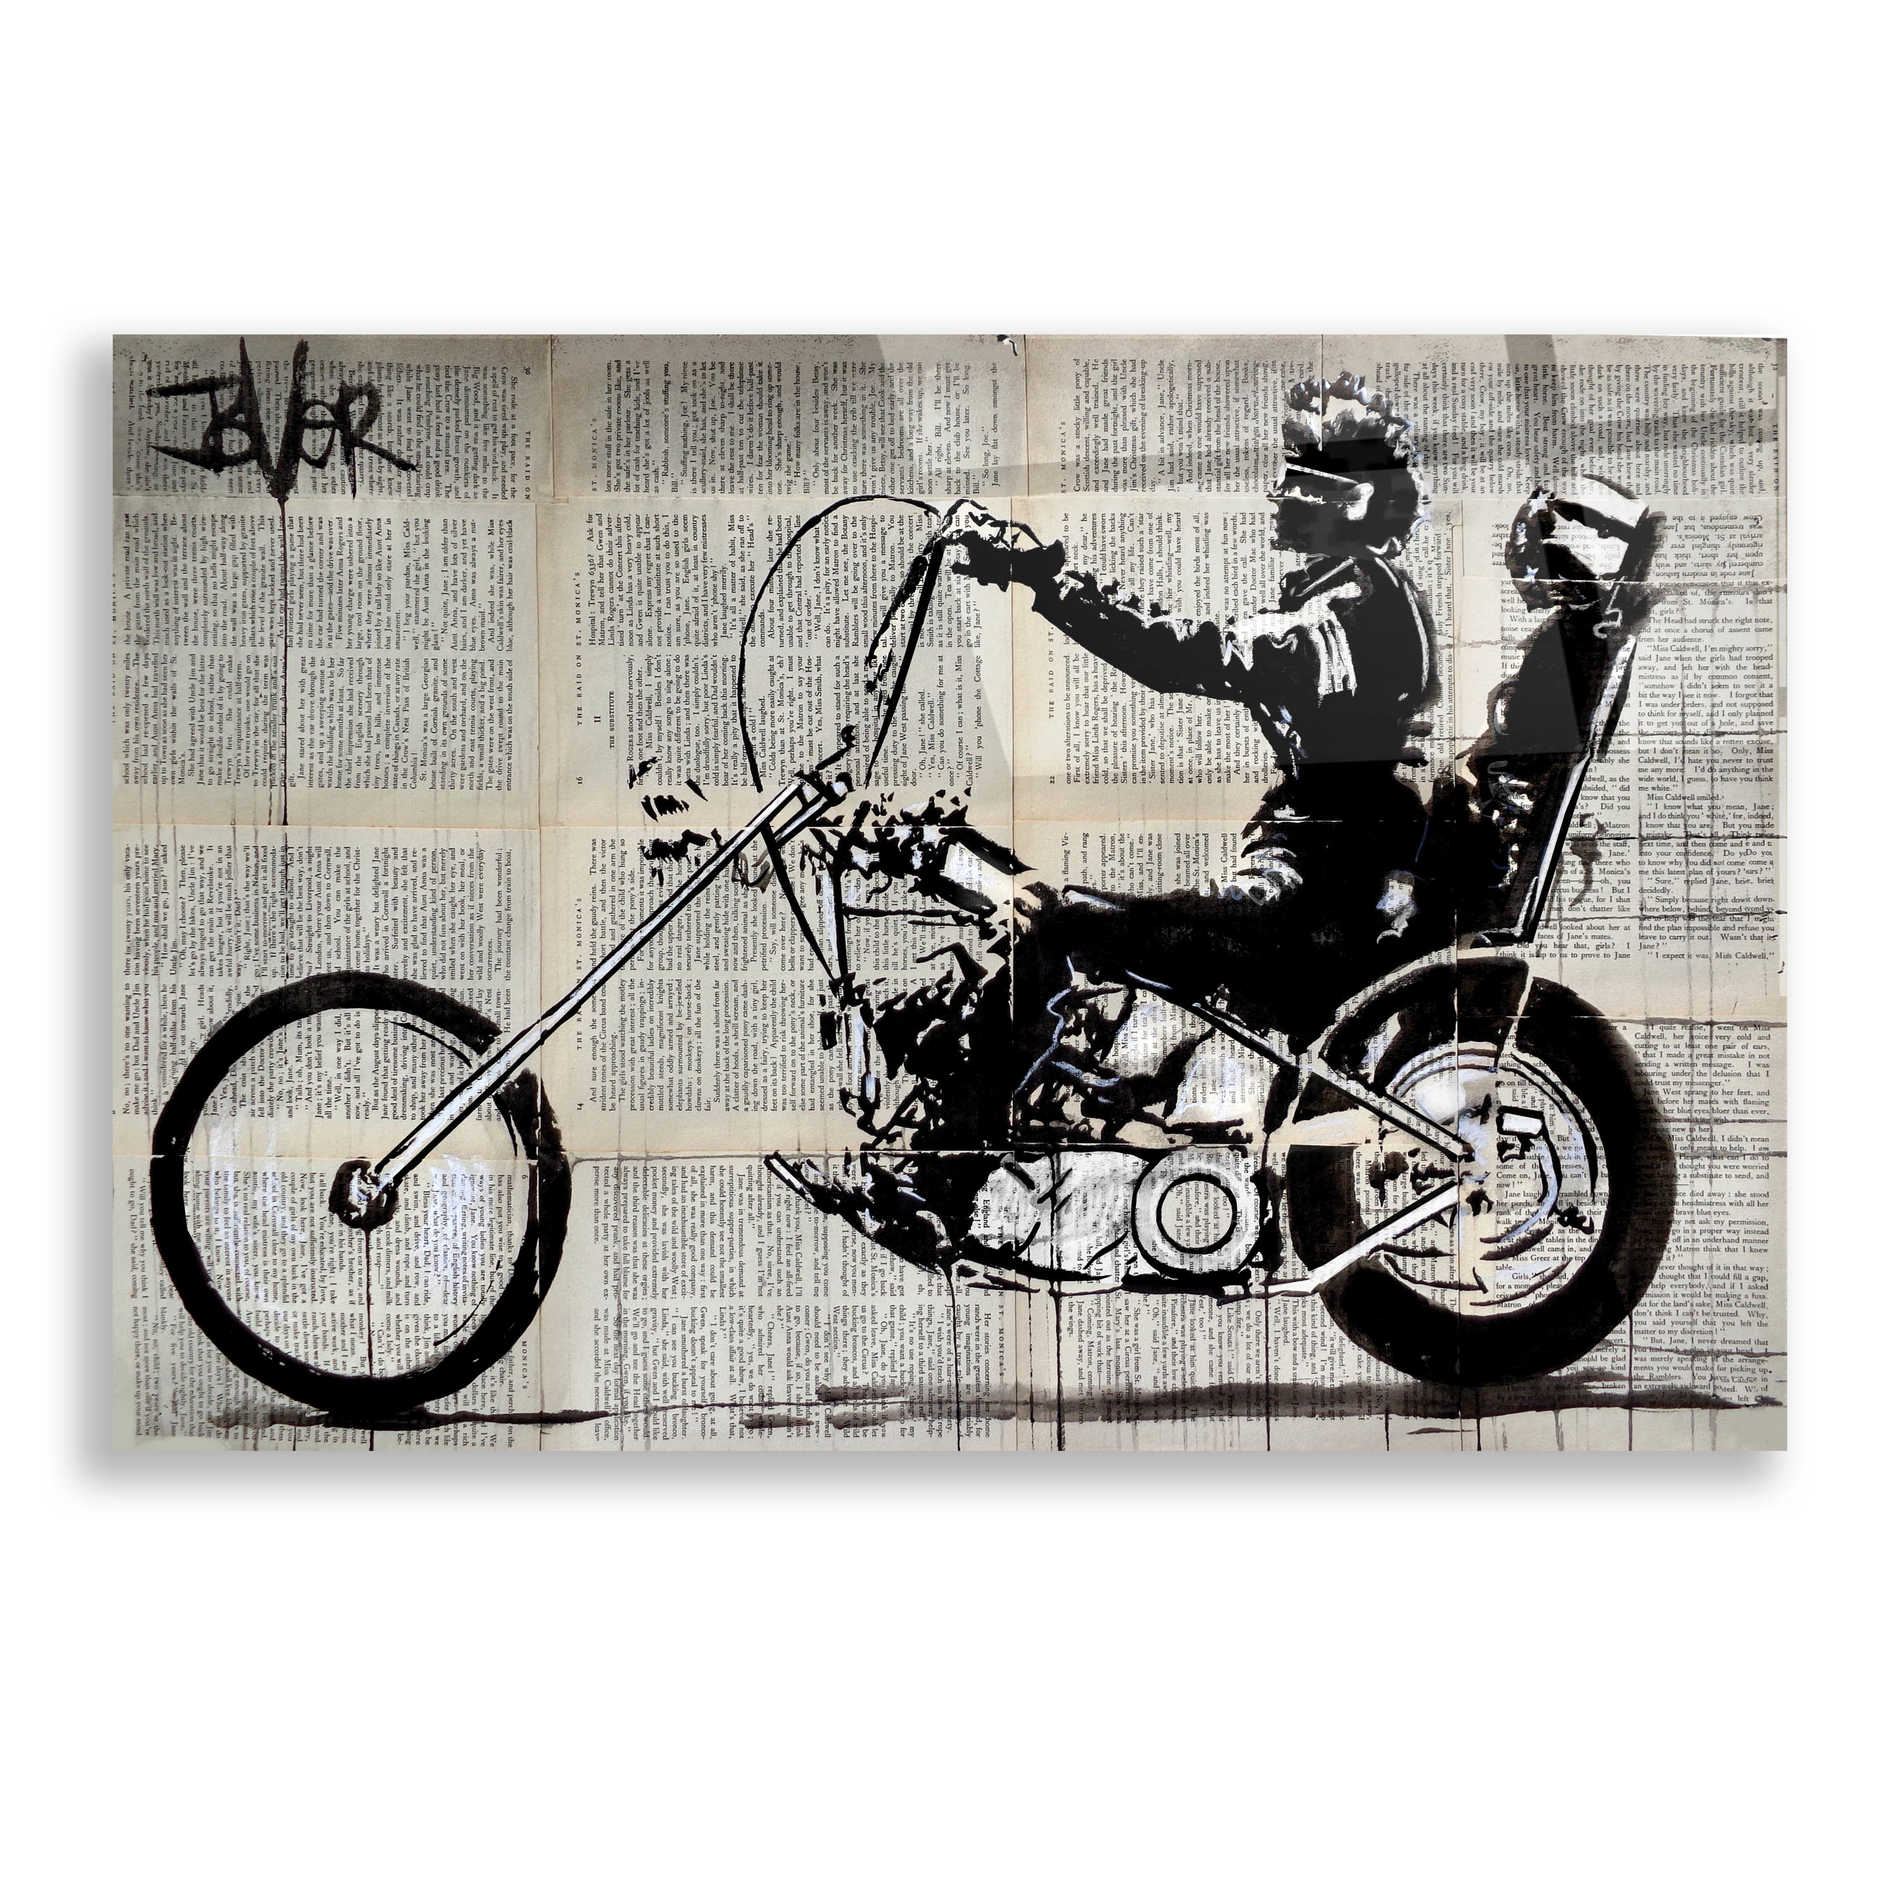 Epic Art 'Get Your Motor Running' by Loui Jover, Acrylic Glass Wall Art,24x16